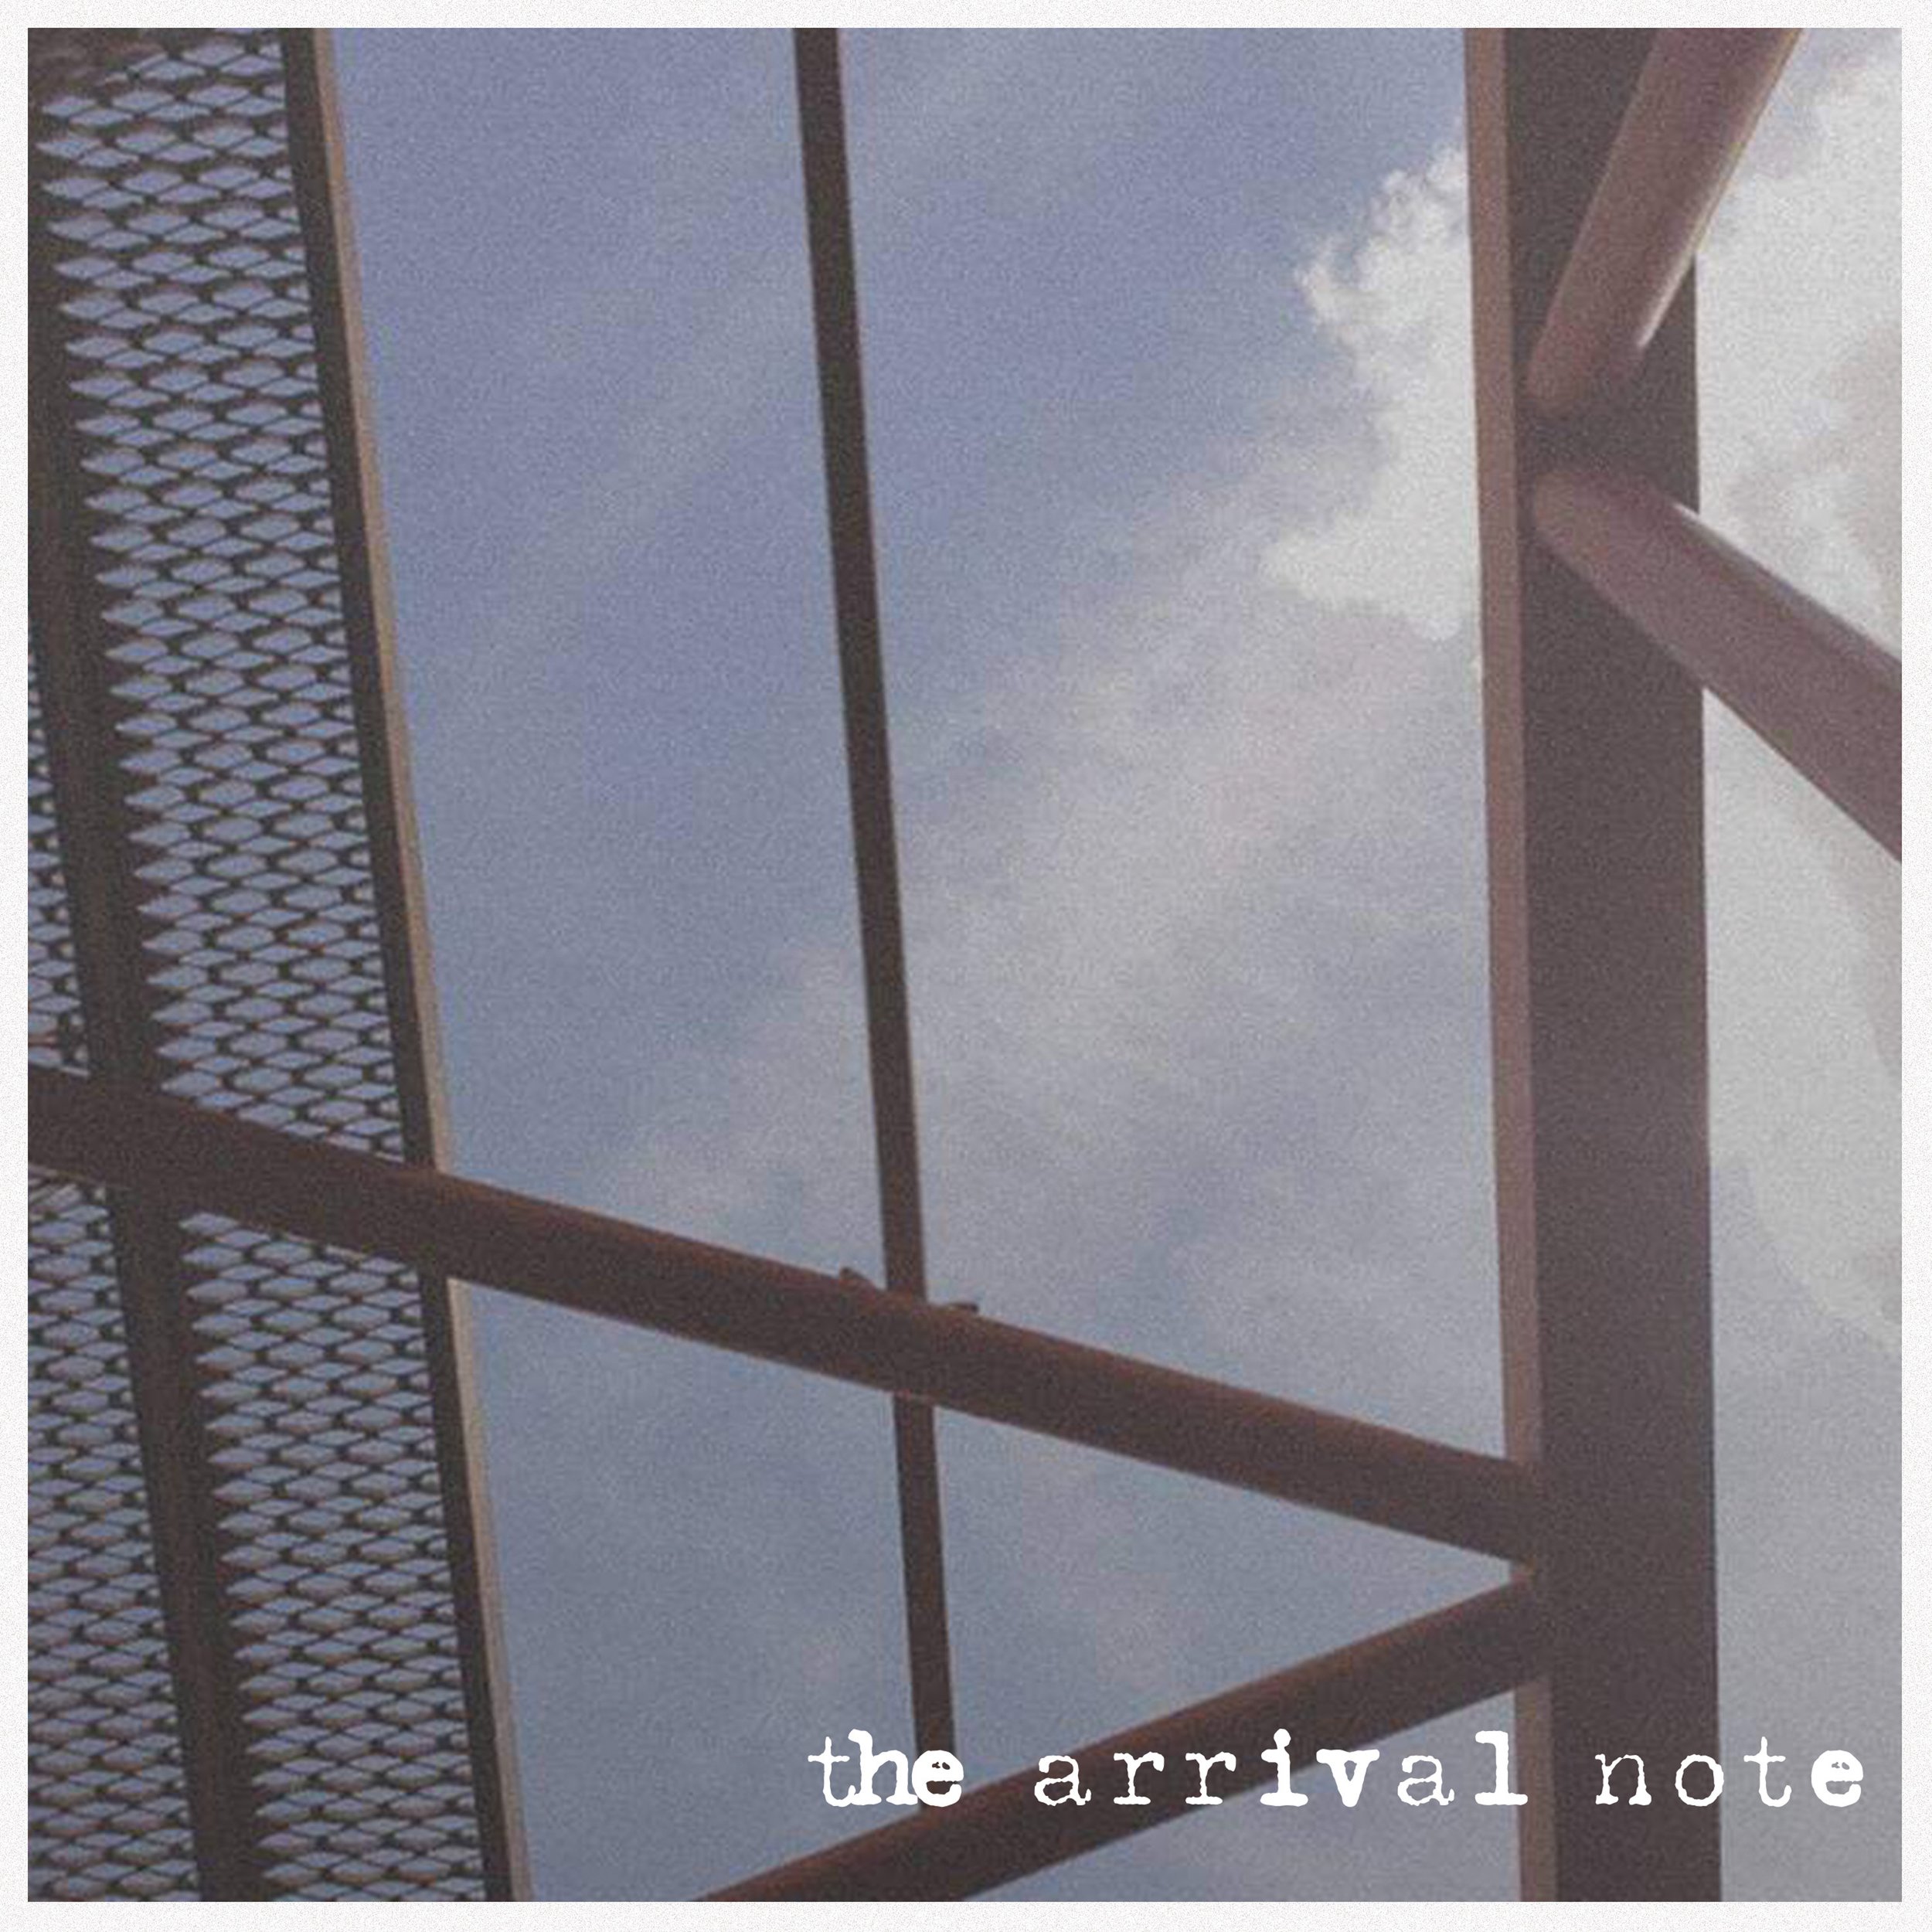 The Arrival Note - Cover.jpg